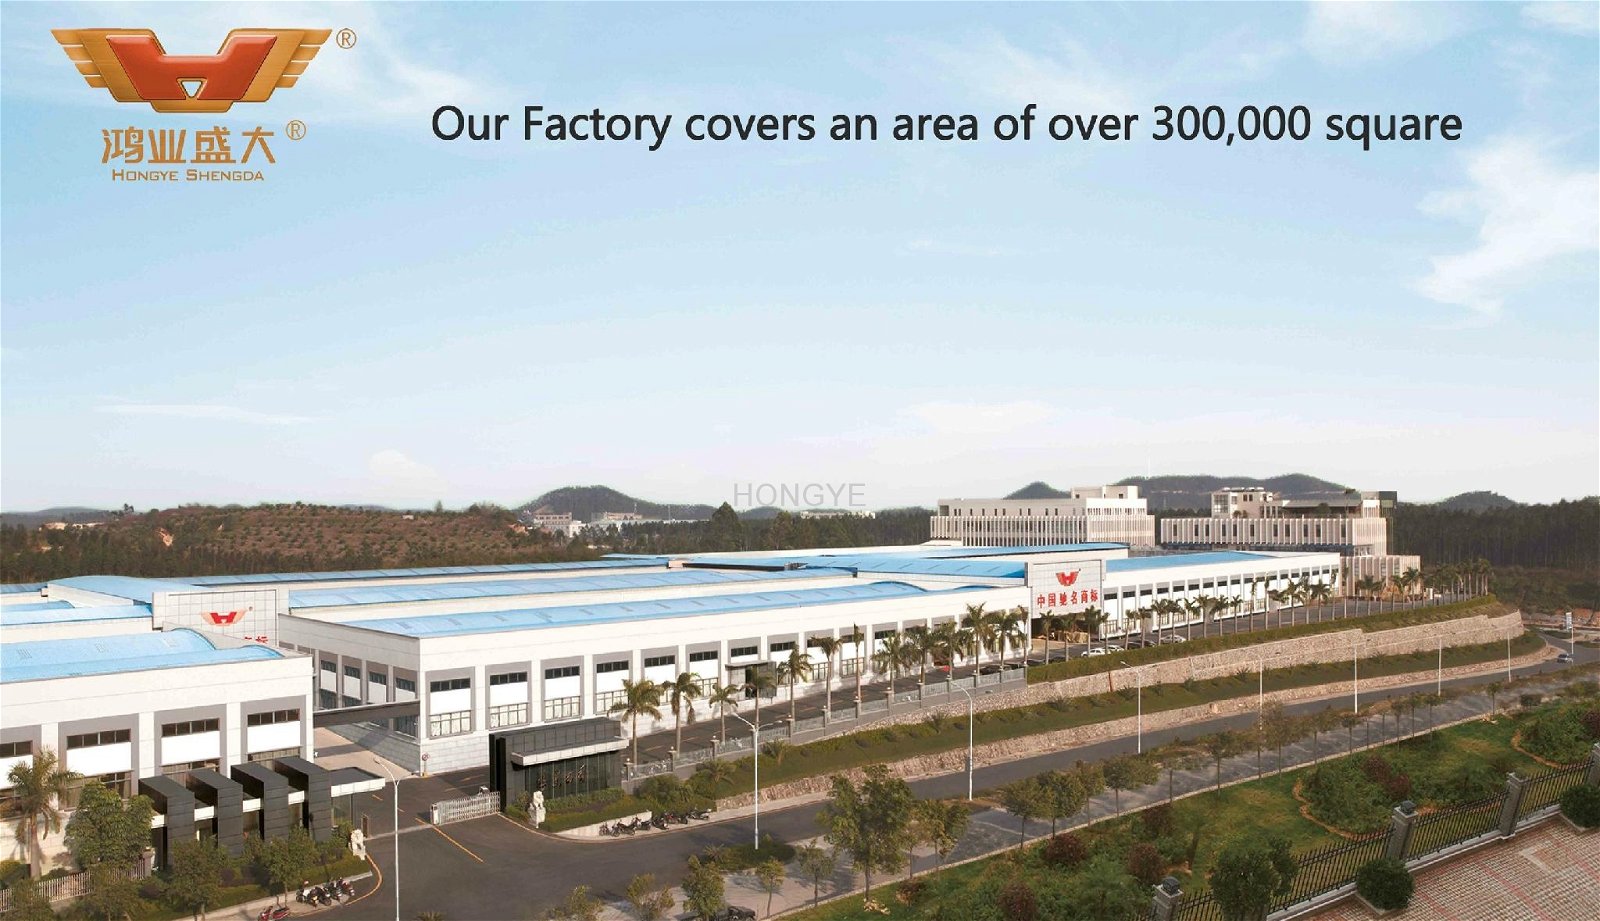 ABOUT US Hongye Furniture Manufacturing Co.,Ltd is a furniture enterprise with more than 30 years history. Our company established in Yongkang, Zhejiang Province, growing and developing in a state-level industrial area-- Heshan Industrial Town, Guangdong. Company registered capital 100.6 million RMB, with an investment of 500 million. We own an industrial area of 21.33 acres, a 300 thousand M2 resort, and a 20 thousand M2 five-star showroom. More than 2,000 employees enjoy working here. We also own a residential land of 153.32 acres, with a complete set and service such as: staff village, Chinese restaurant, Good Luck Business Center and Gangnan Chalet villas. We welcome our guests presence from all over the world. Our company has been continuously honored as “Hecheng No.1 Taxpayer”, 2017“Famous Brand of Guangdong”. We past the ISO9001：2008 Quality management system certification, ISO14001：2004 Environmental management system certification, Occupational health and safety management system certification, China Environmental Labeling Product Certification, China environmental protection products (CQC) certification, FSC  forest certification , ISO14025  international standard for environmental labeling III certificate, Ergonomic product certification, AAA Unit of Quality-Service- Integrity. In addition, we won more than 100 patents: Invention patent, utility model patent and appearance patent. We are honored as the Most Trustworthy Enterprise of Guangdong Province, awarding to safety standard certificate, Enterprise standardization AAAA, China's industrial innovation oriented enterprise, Jiangmen intelligent environmental protection engineering technology research center, Hi-tech cultivation enterprises, Enterprises AAA certificate and China’s top ten brand of furniture. We are a manufacturer of office and hotel furniture. With advanced equipment and eco- friendly materials, our products prevail more than 200 nations. Our feature products including: Wood veneer furniture, melamine laminated furniture, hotel fixed f